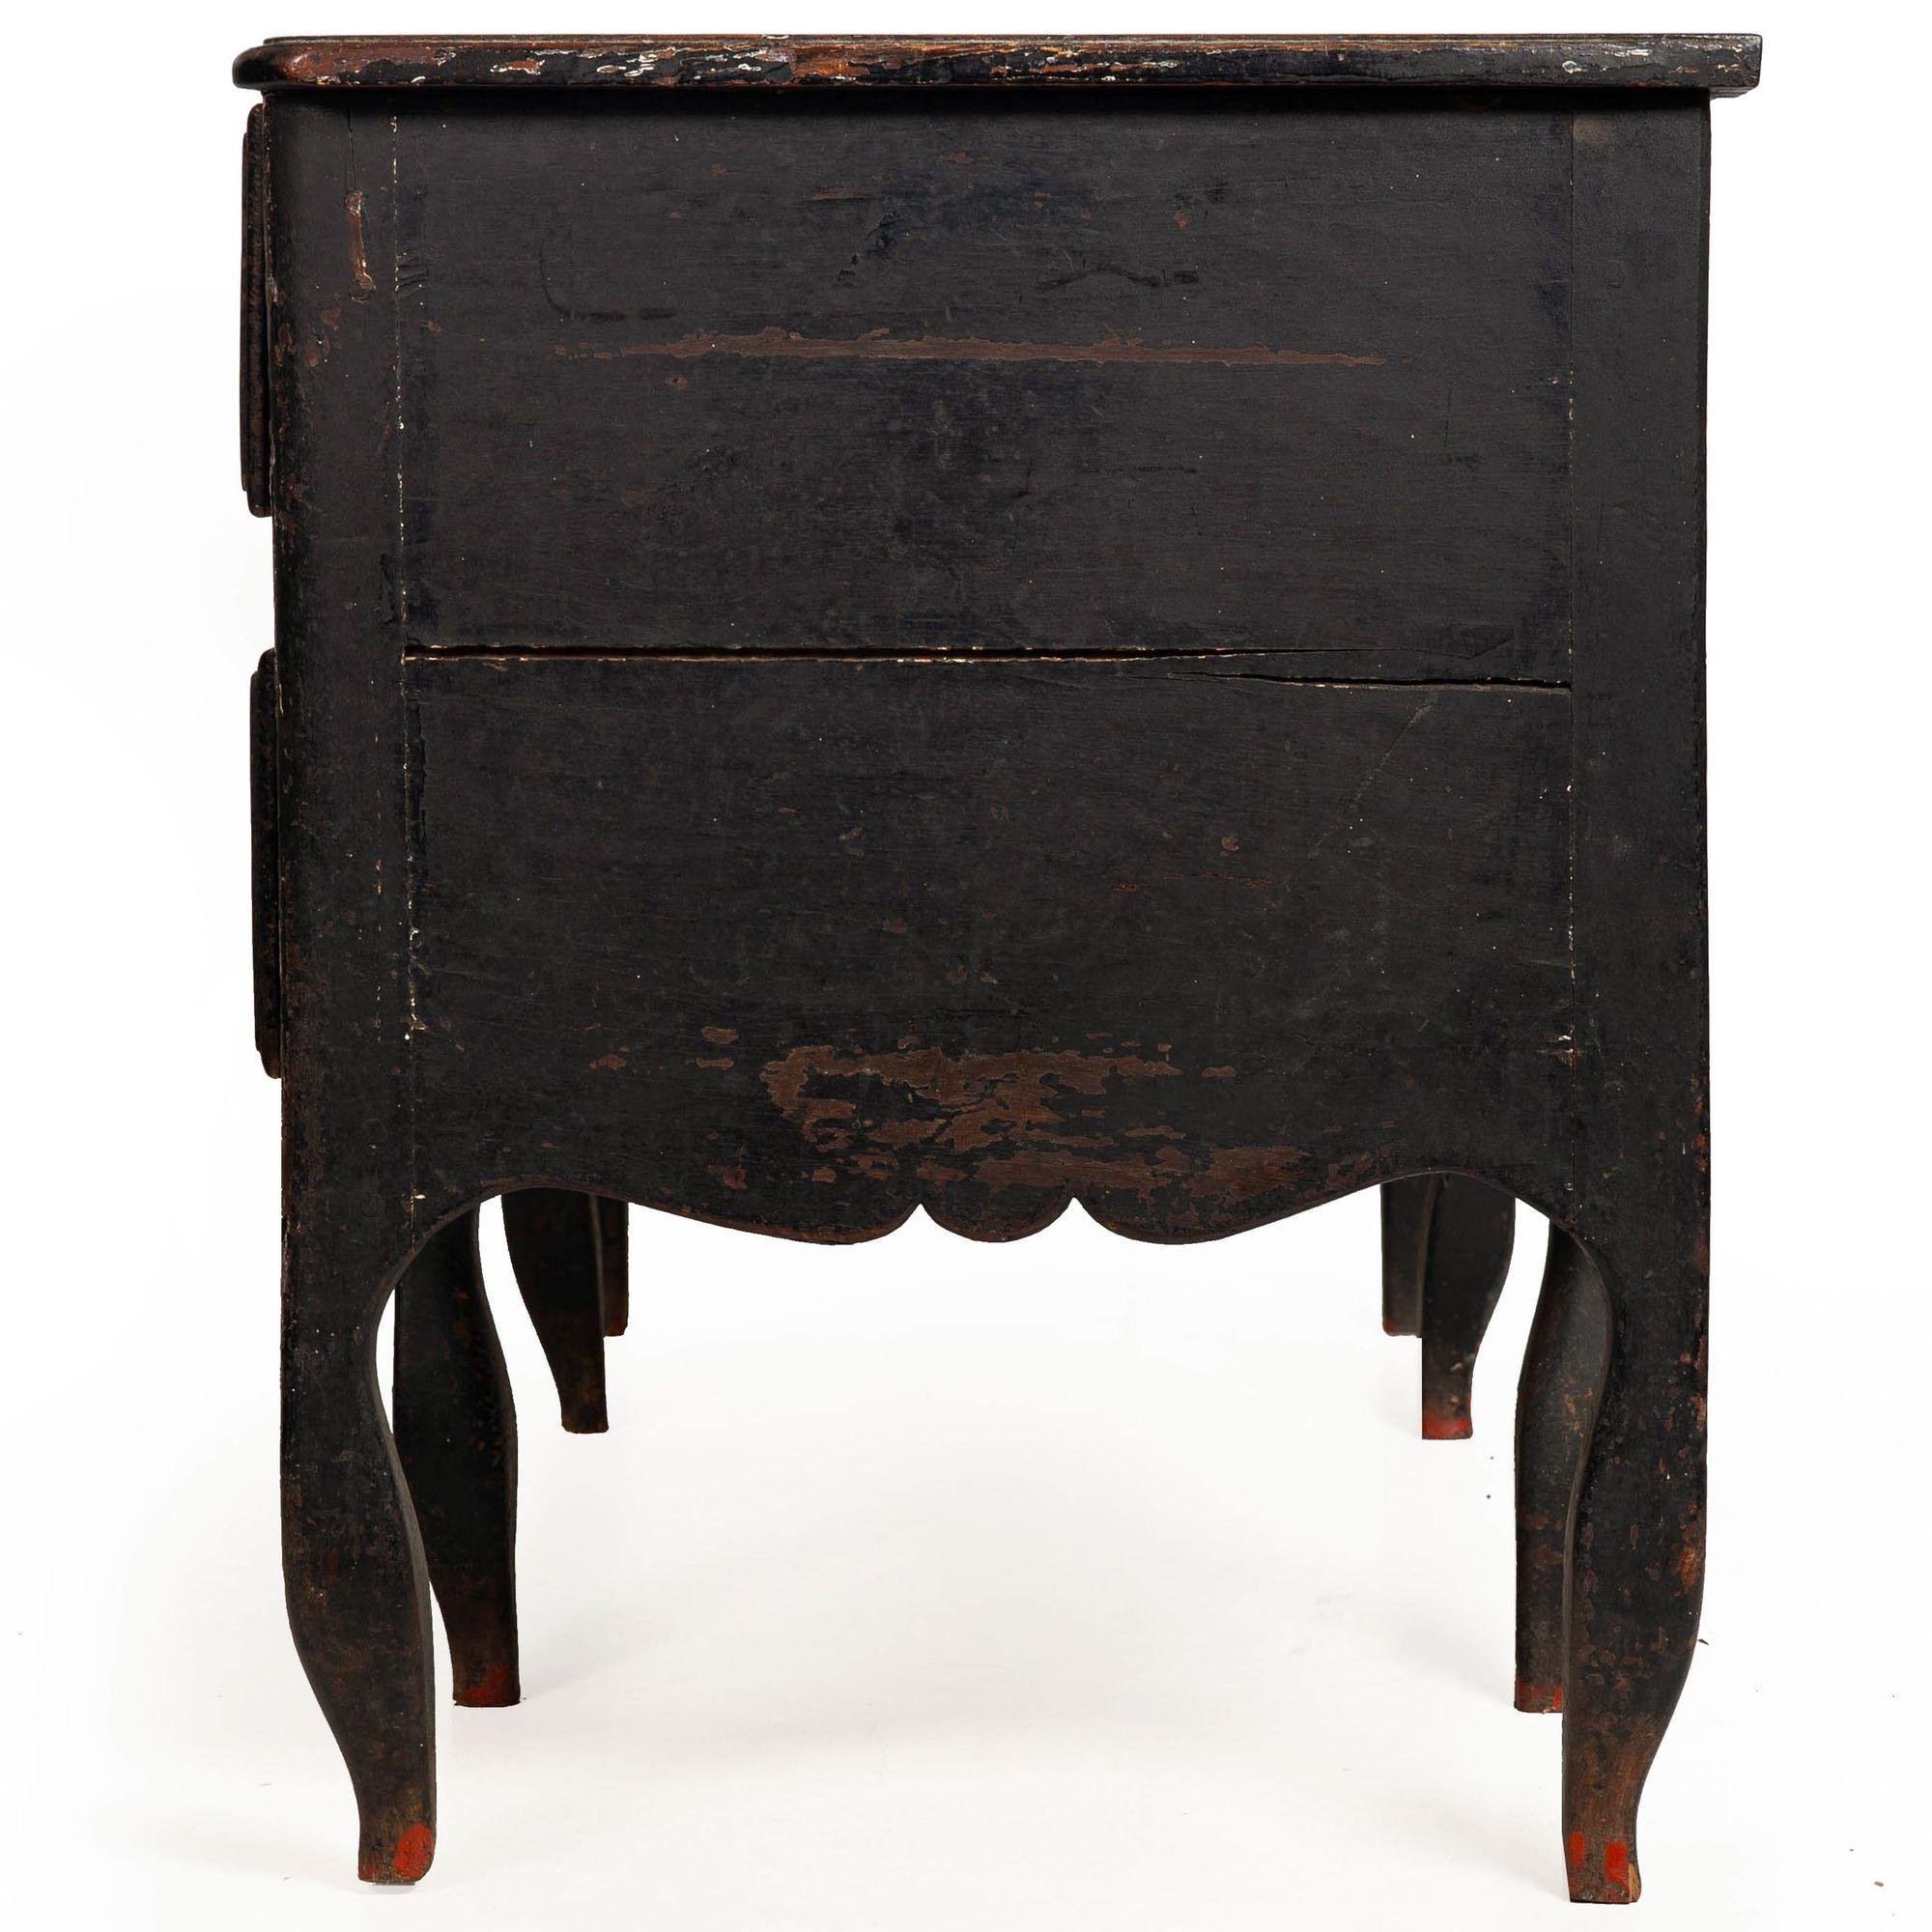 18th Century French Provincial Black Painted “Mazarin” Pedestal Desk In Good Condition For Sale In Shippensburg, PA